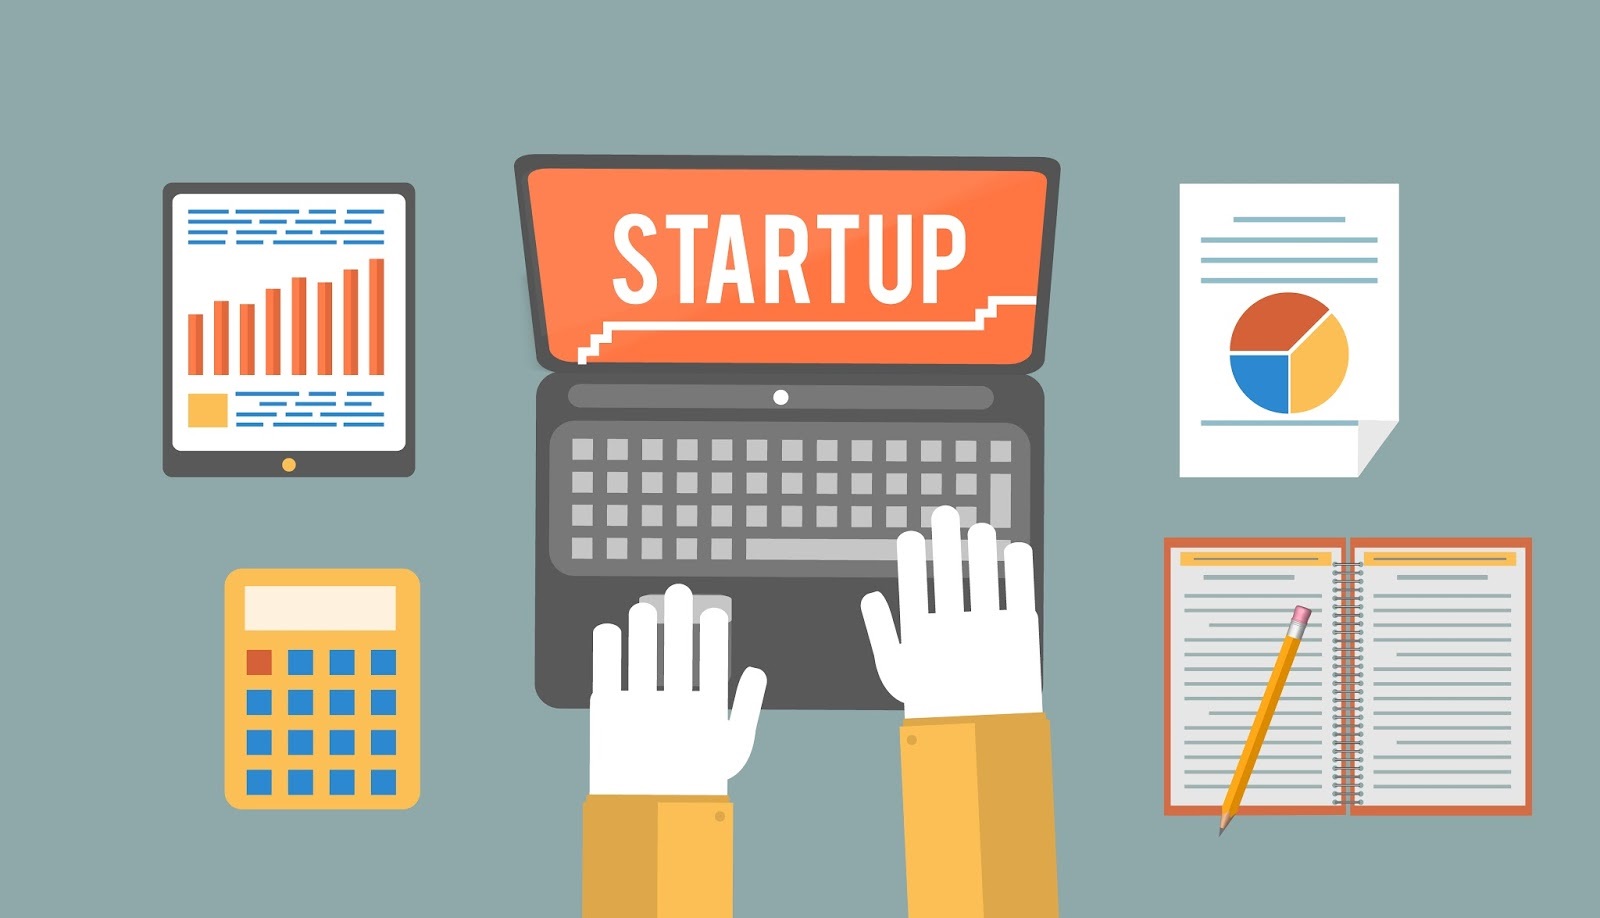 What are the benefits and eligibility to get any SME loan for your startup business?